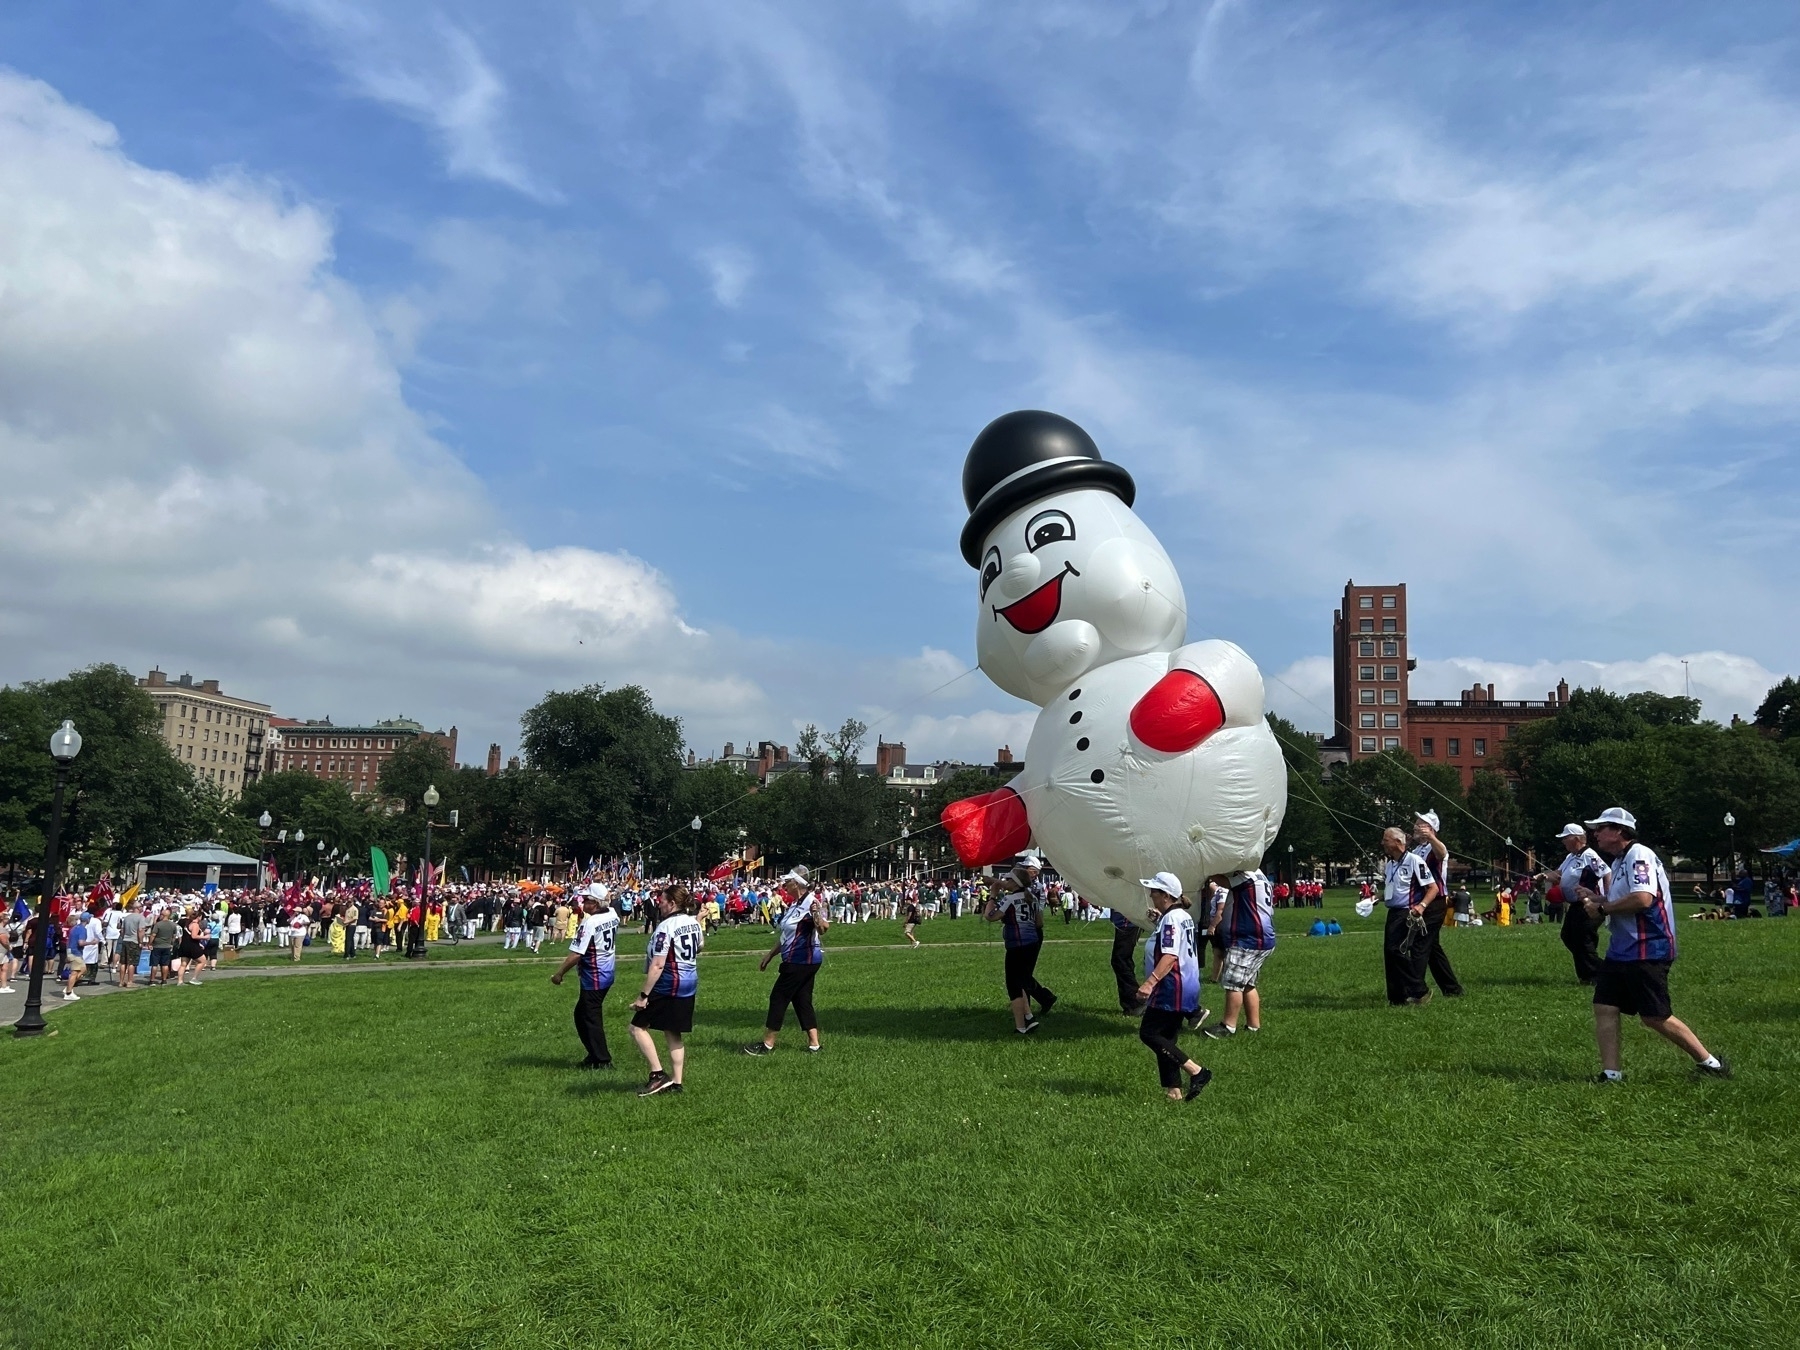 A view of Boston Common. A group of people in the foreground are holding down a large inflatable snowman balloon, part of a Lions Club parade.